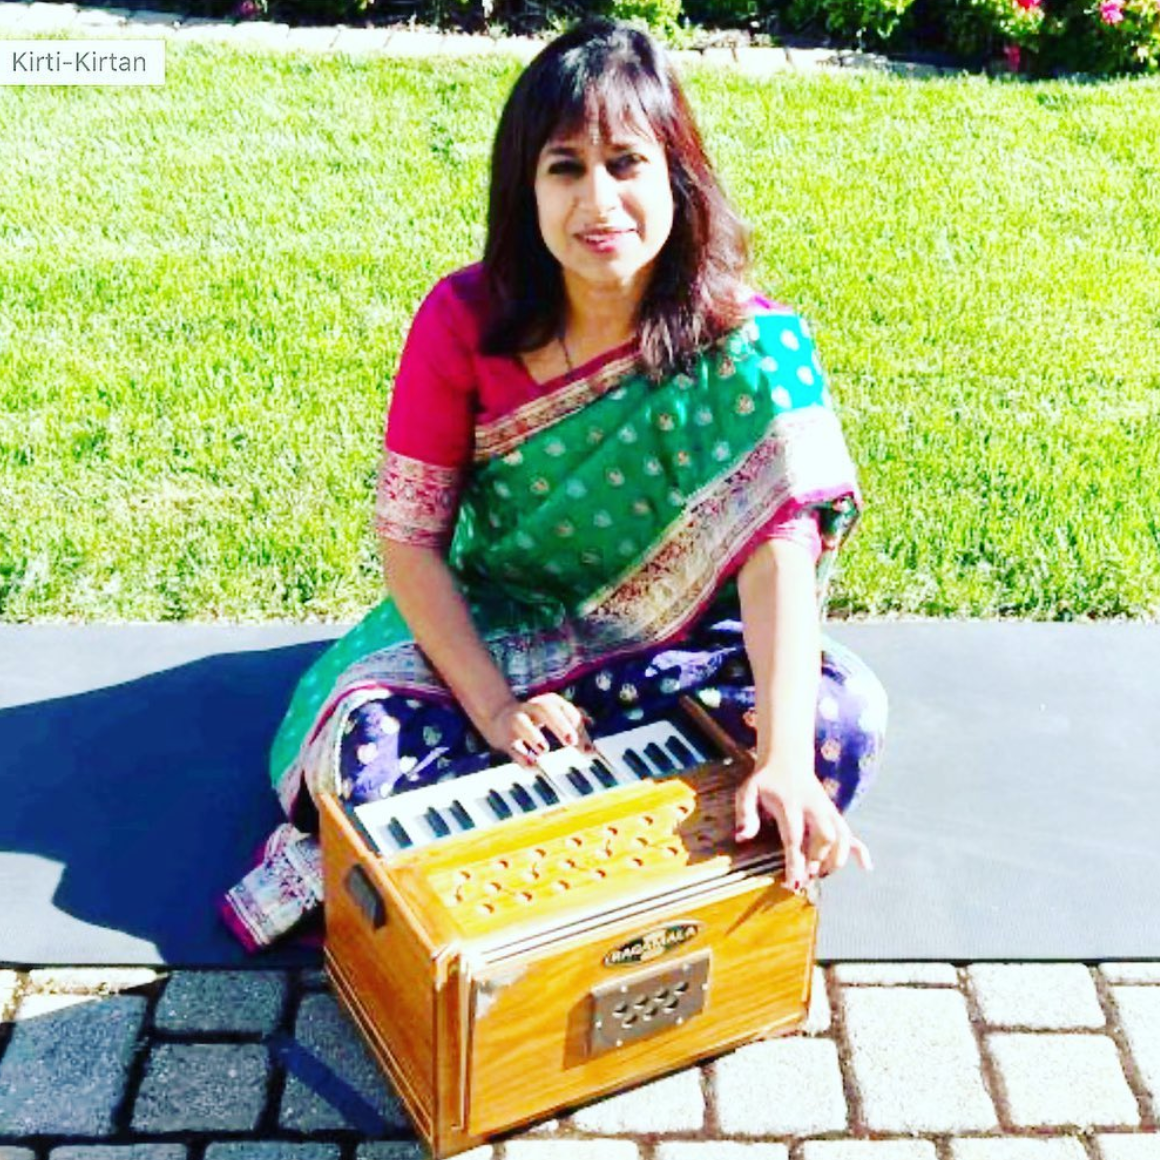 RAFFLE TICKET: 1-hour Harmonium Lesson, or other skill winner would like to develop, with Kirti Saran